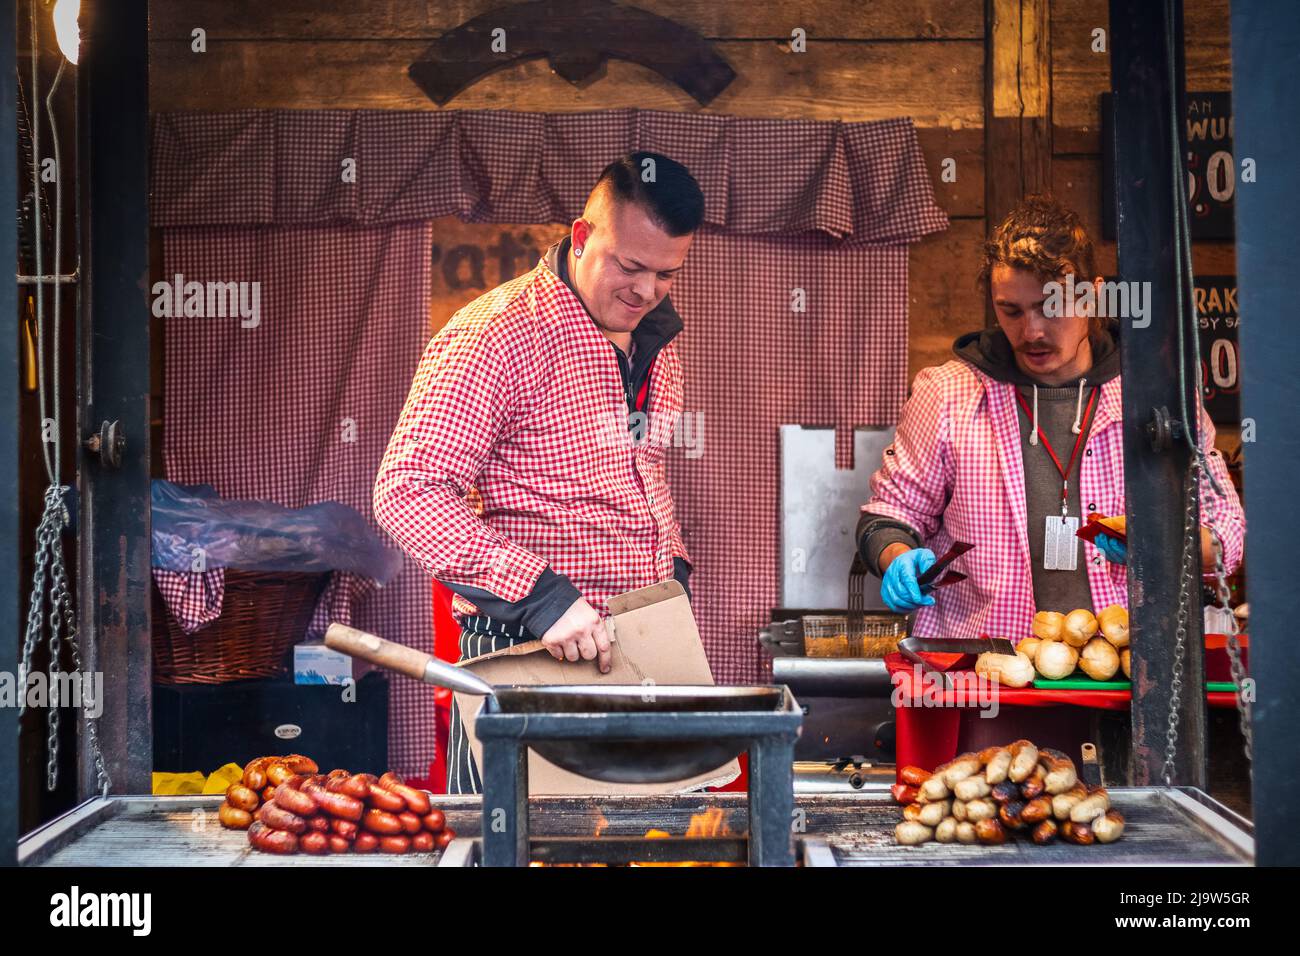 London, UK - December 2, 2021 - Two male staff selling hot dogs at Christmas market Hyde Park Winter Wonderland Stock Photo